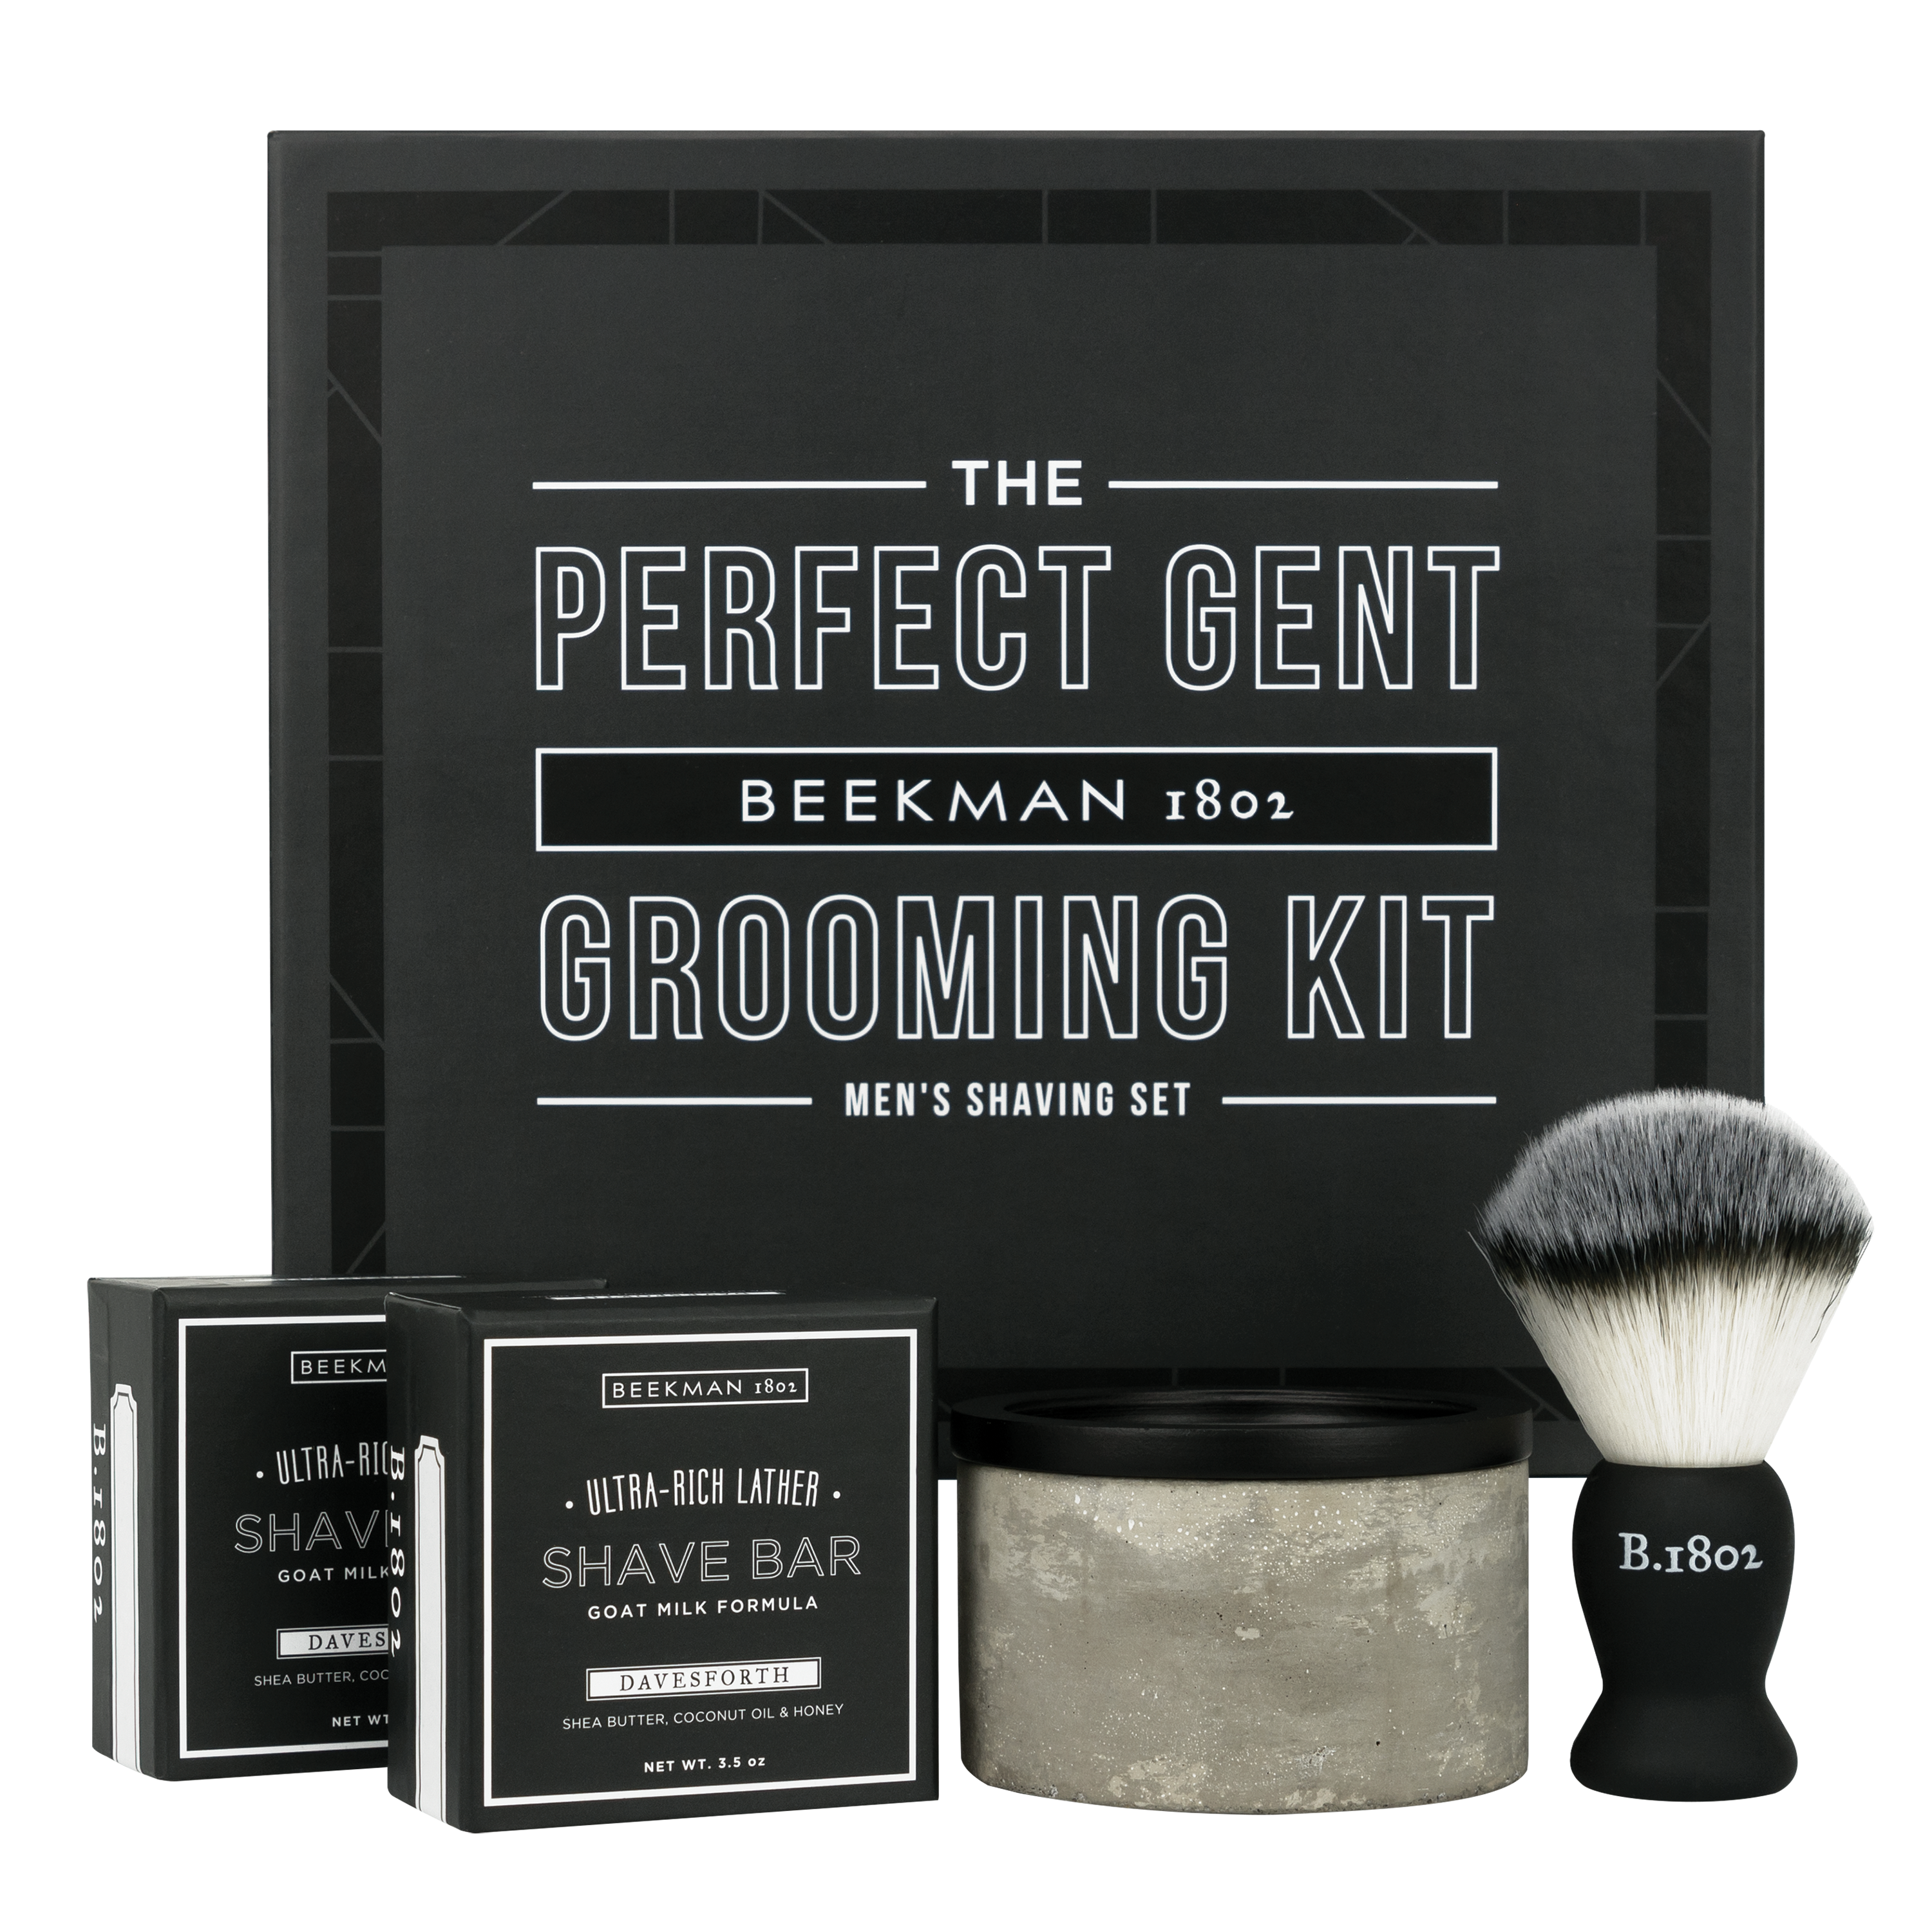 The Perfect Gent's Grooming Kit